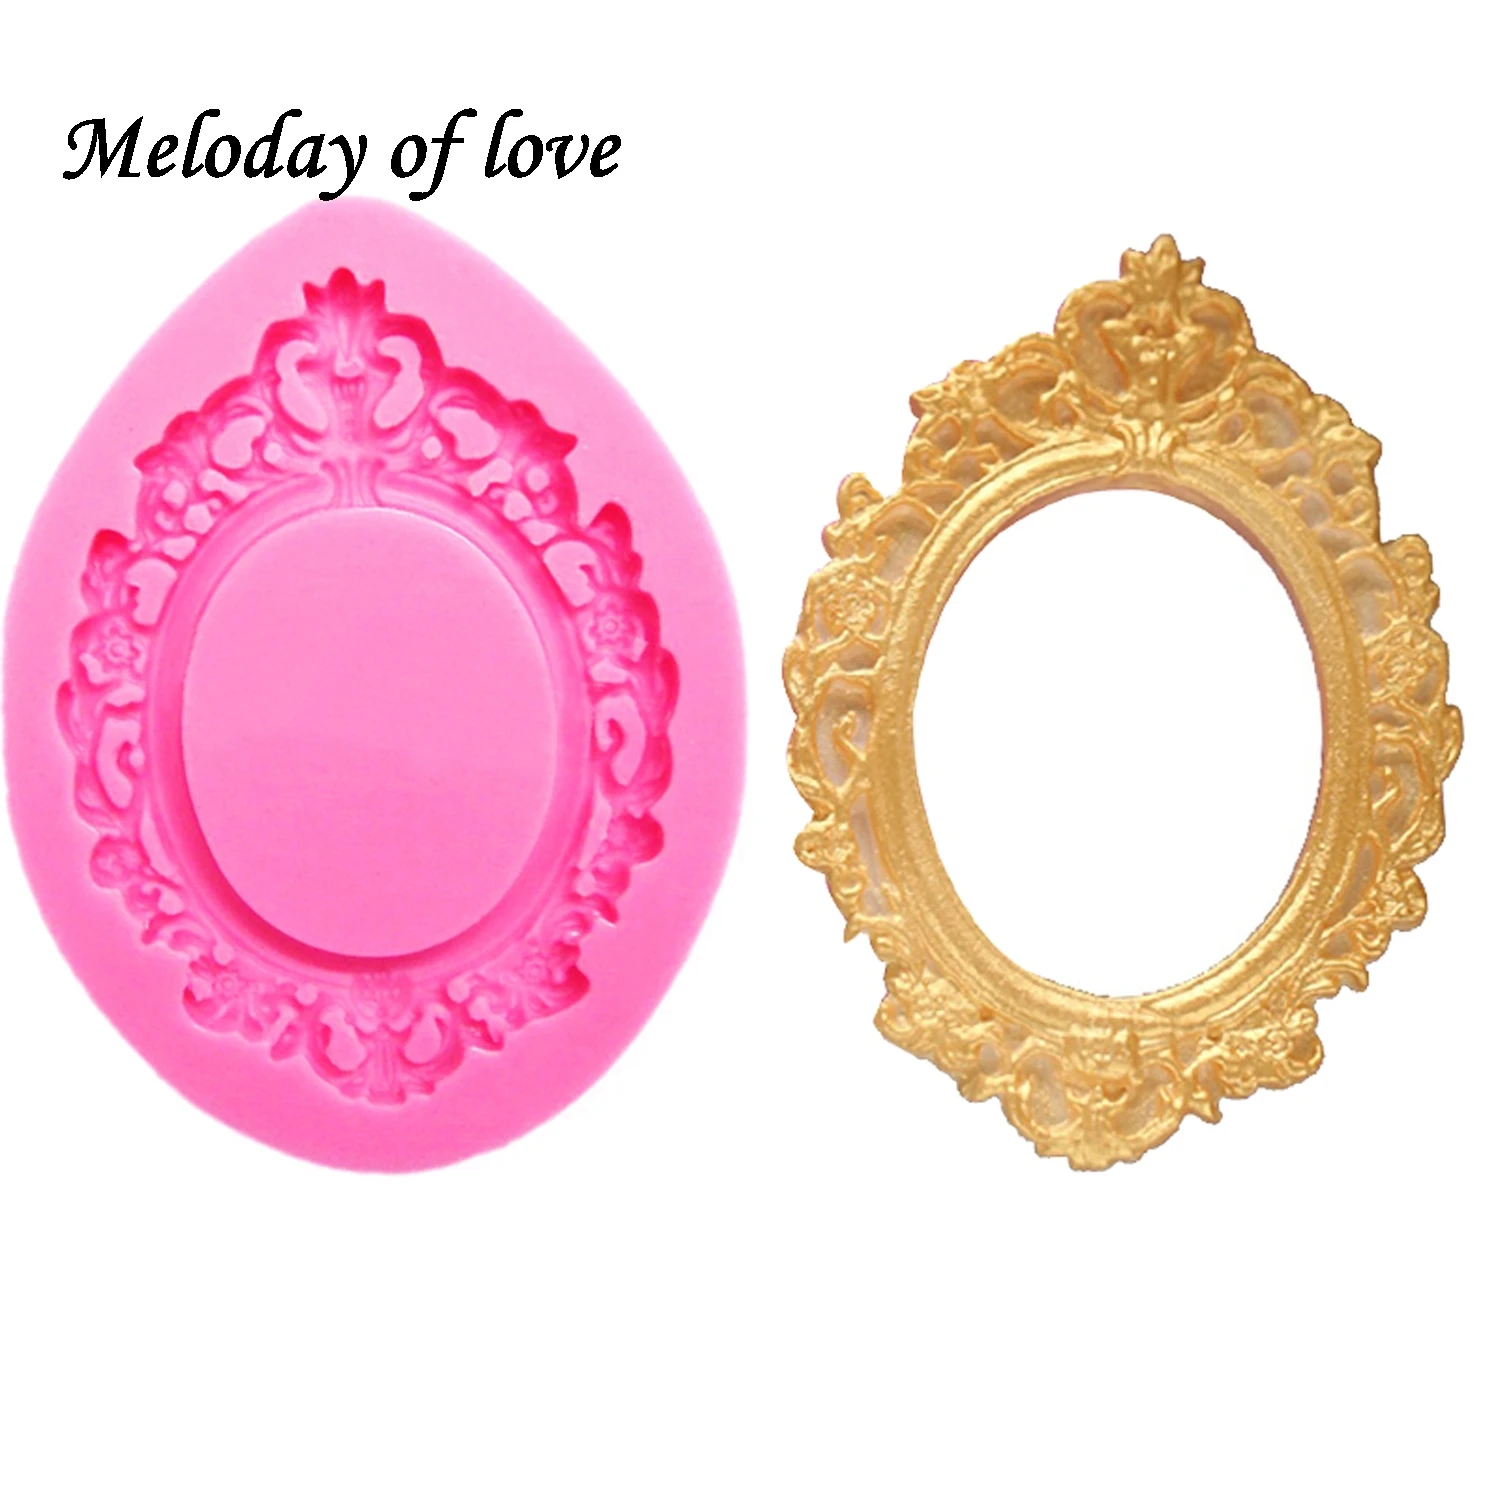 Aliexpress - Retro Fashion Frame shape for Cake decorating tools Chocolate Mold for the Kitchen Baking DIY fondant silicone mold T0611